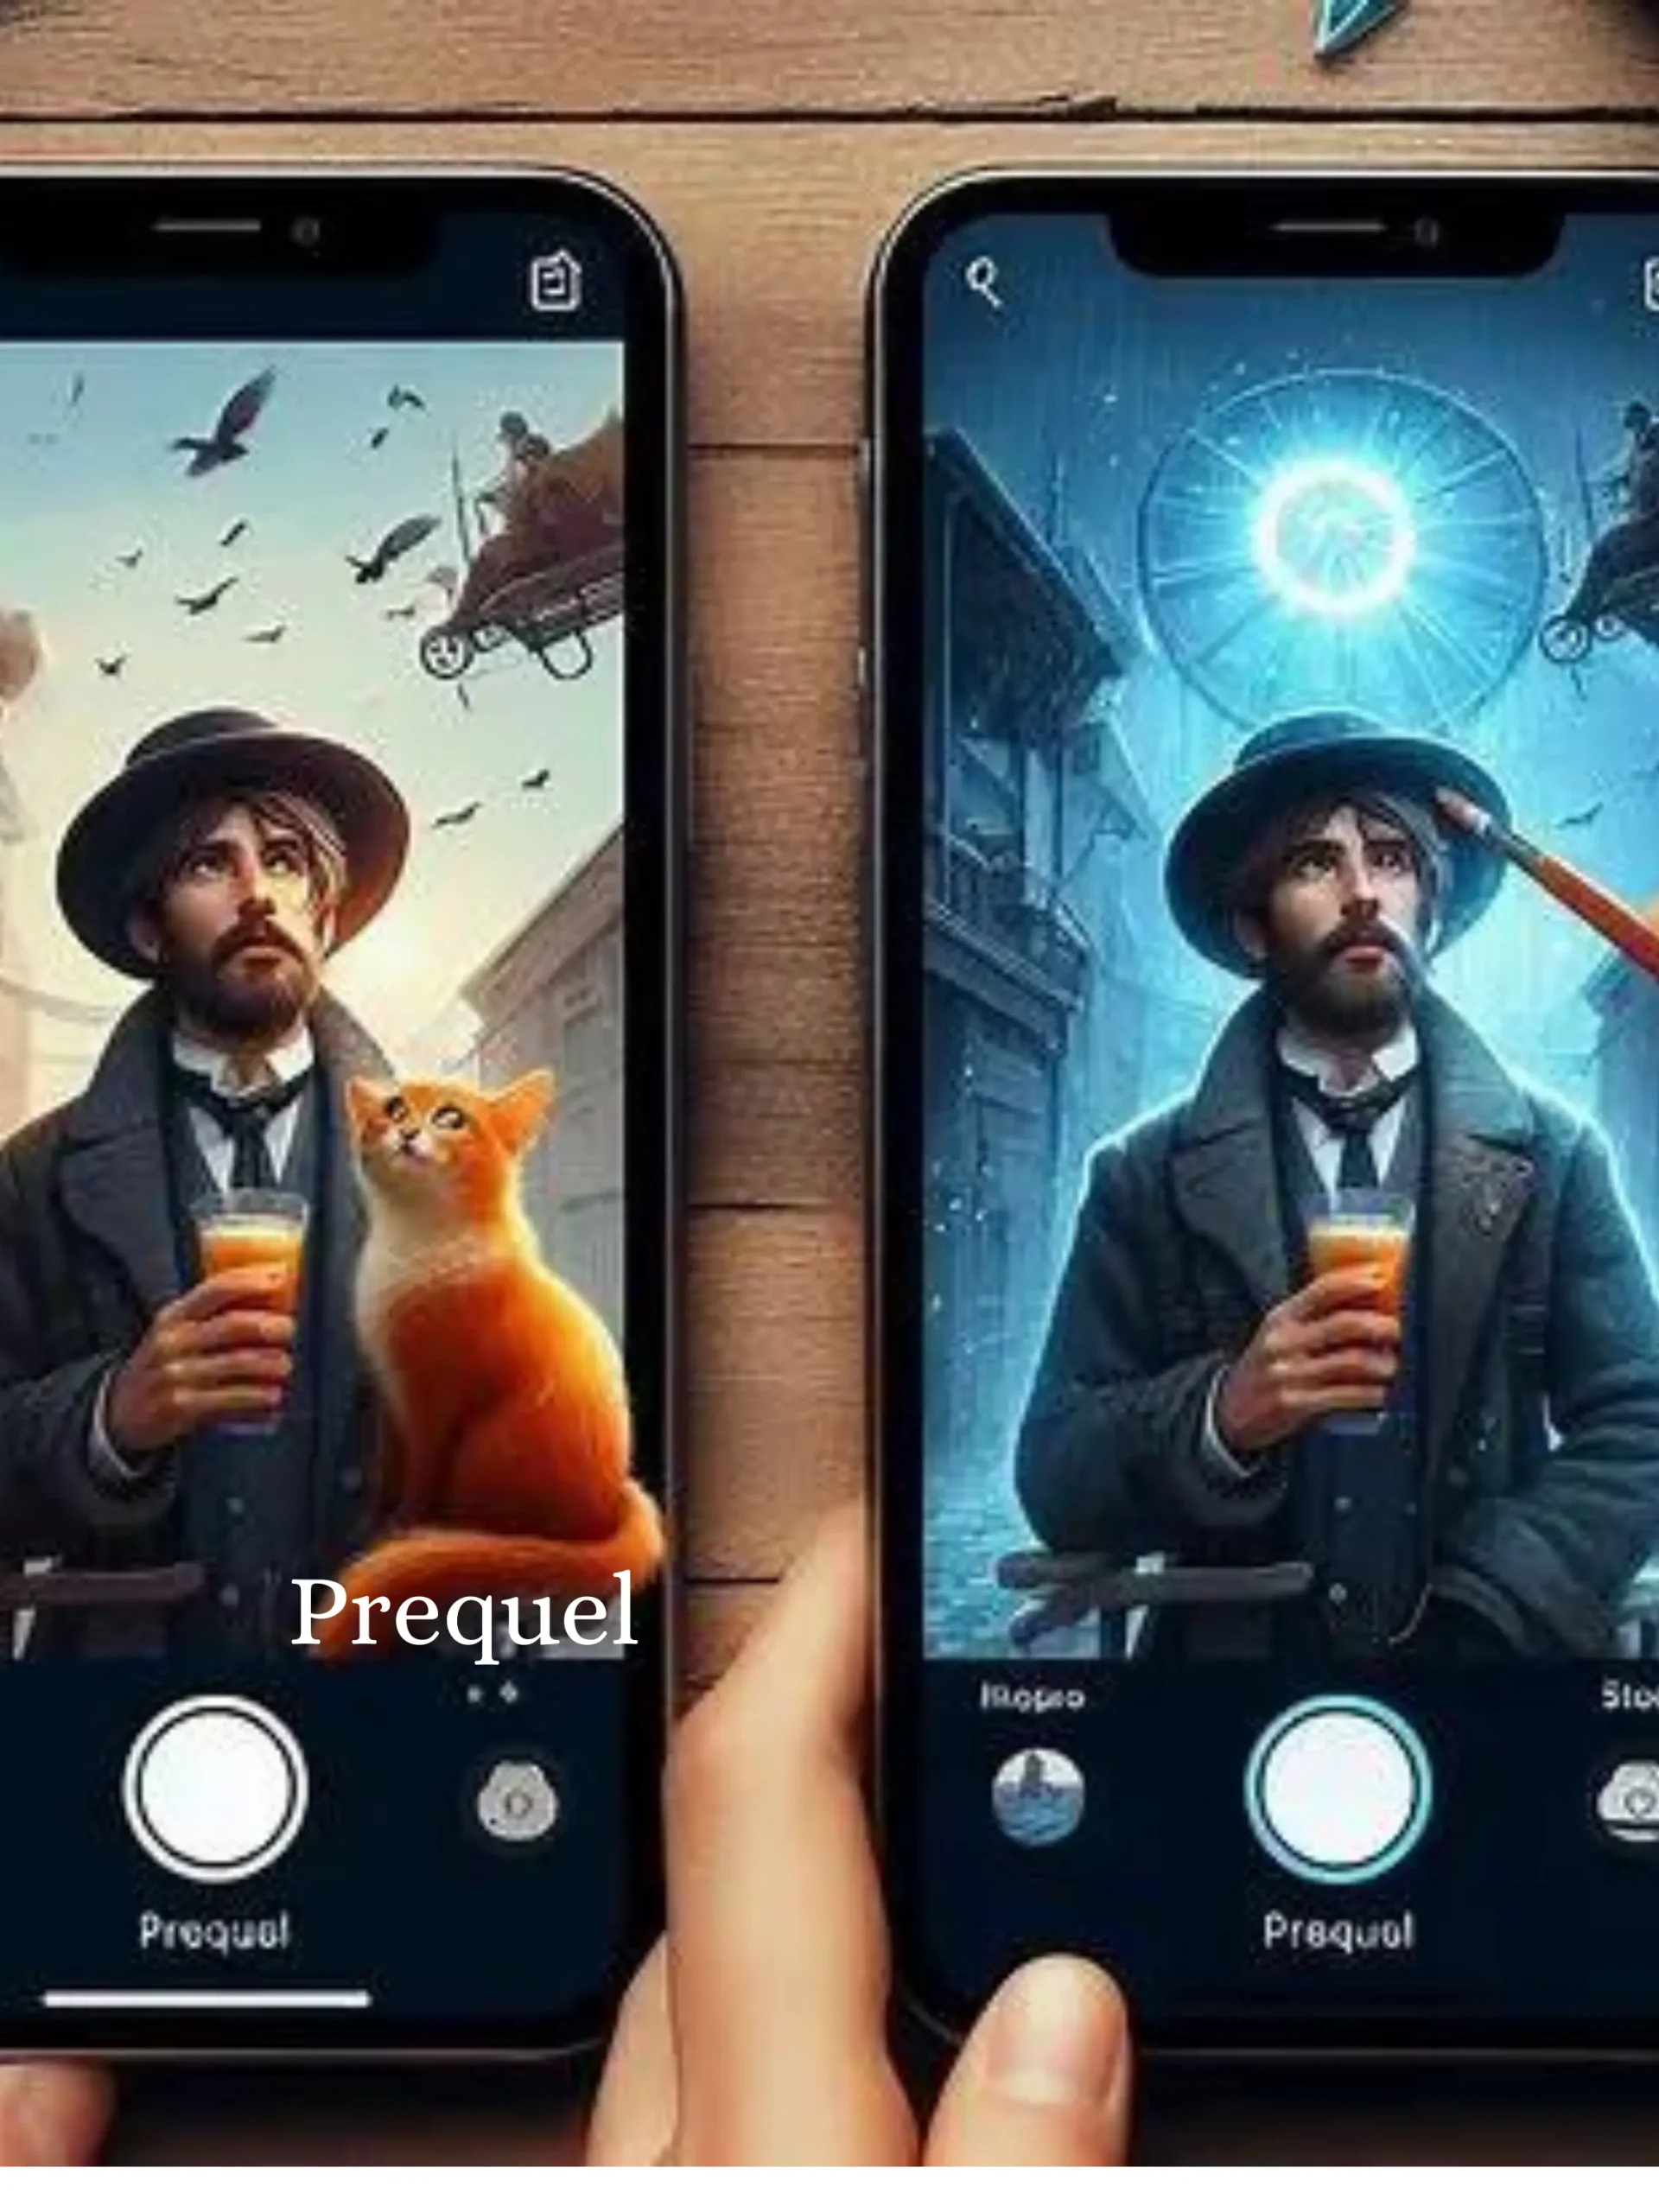 Prequel mod Apk without watermark